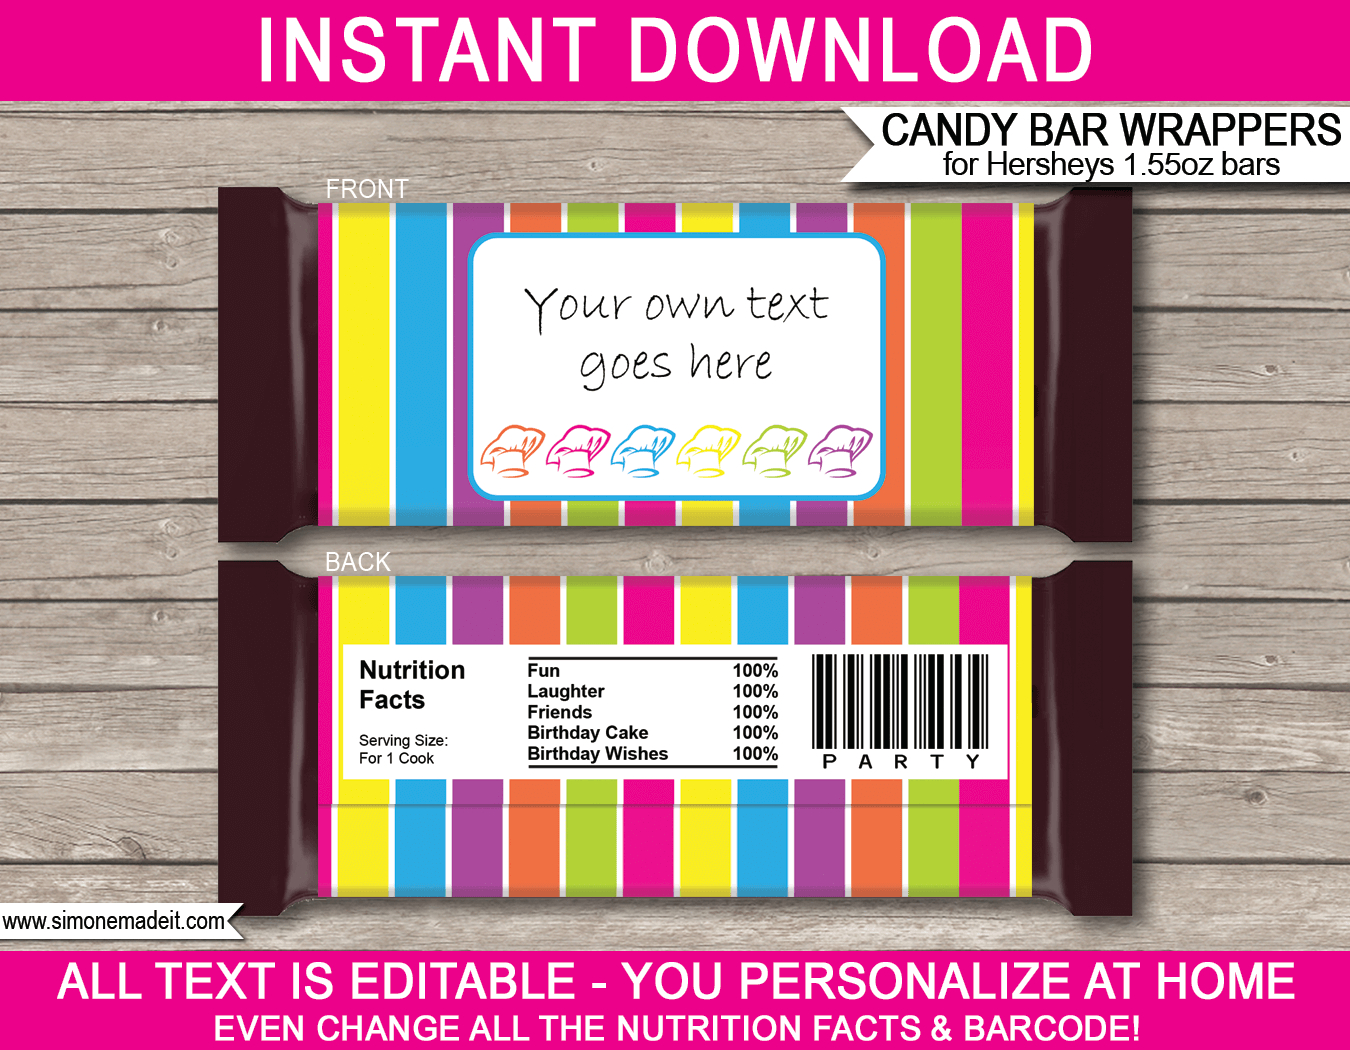 Candy Bar Wrapper Template For Mac - Ameasysite Pertaining To Candy Bar Wrapper Template For Word